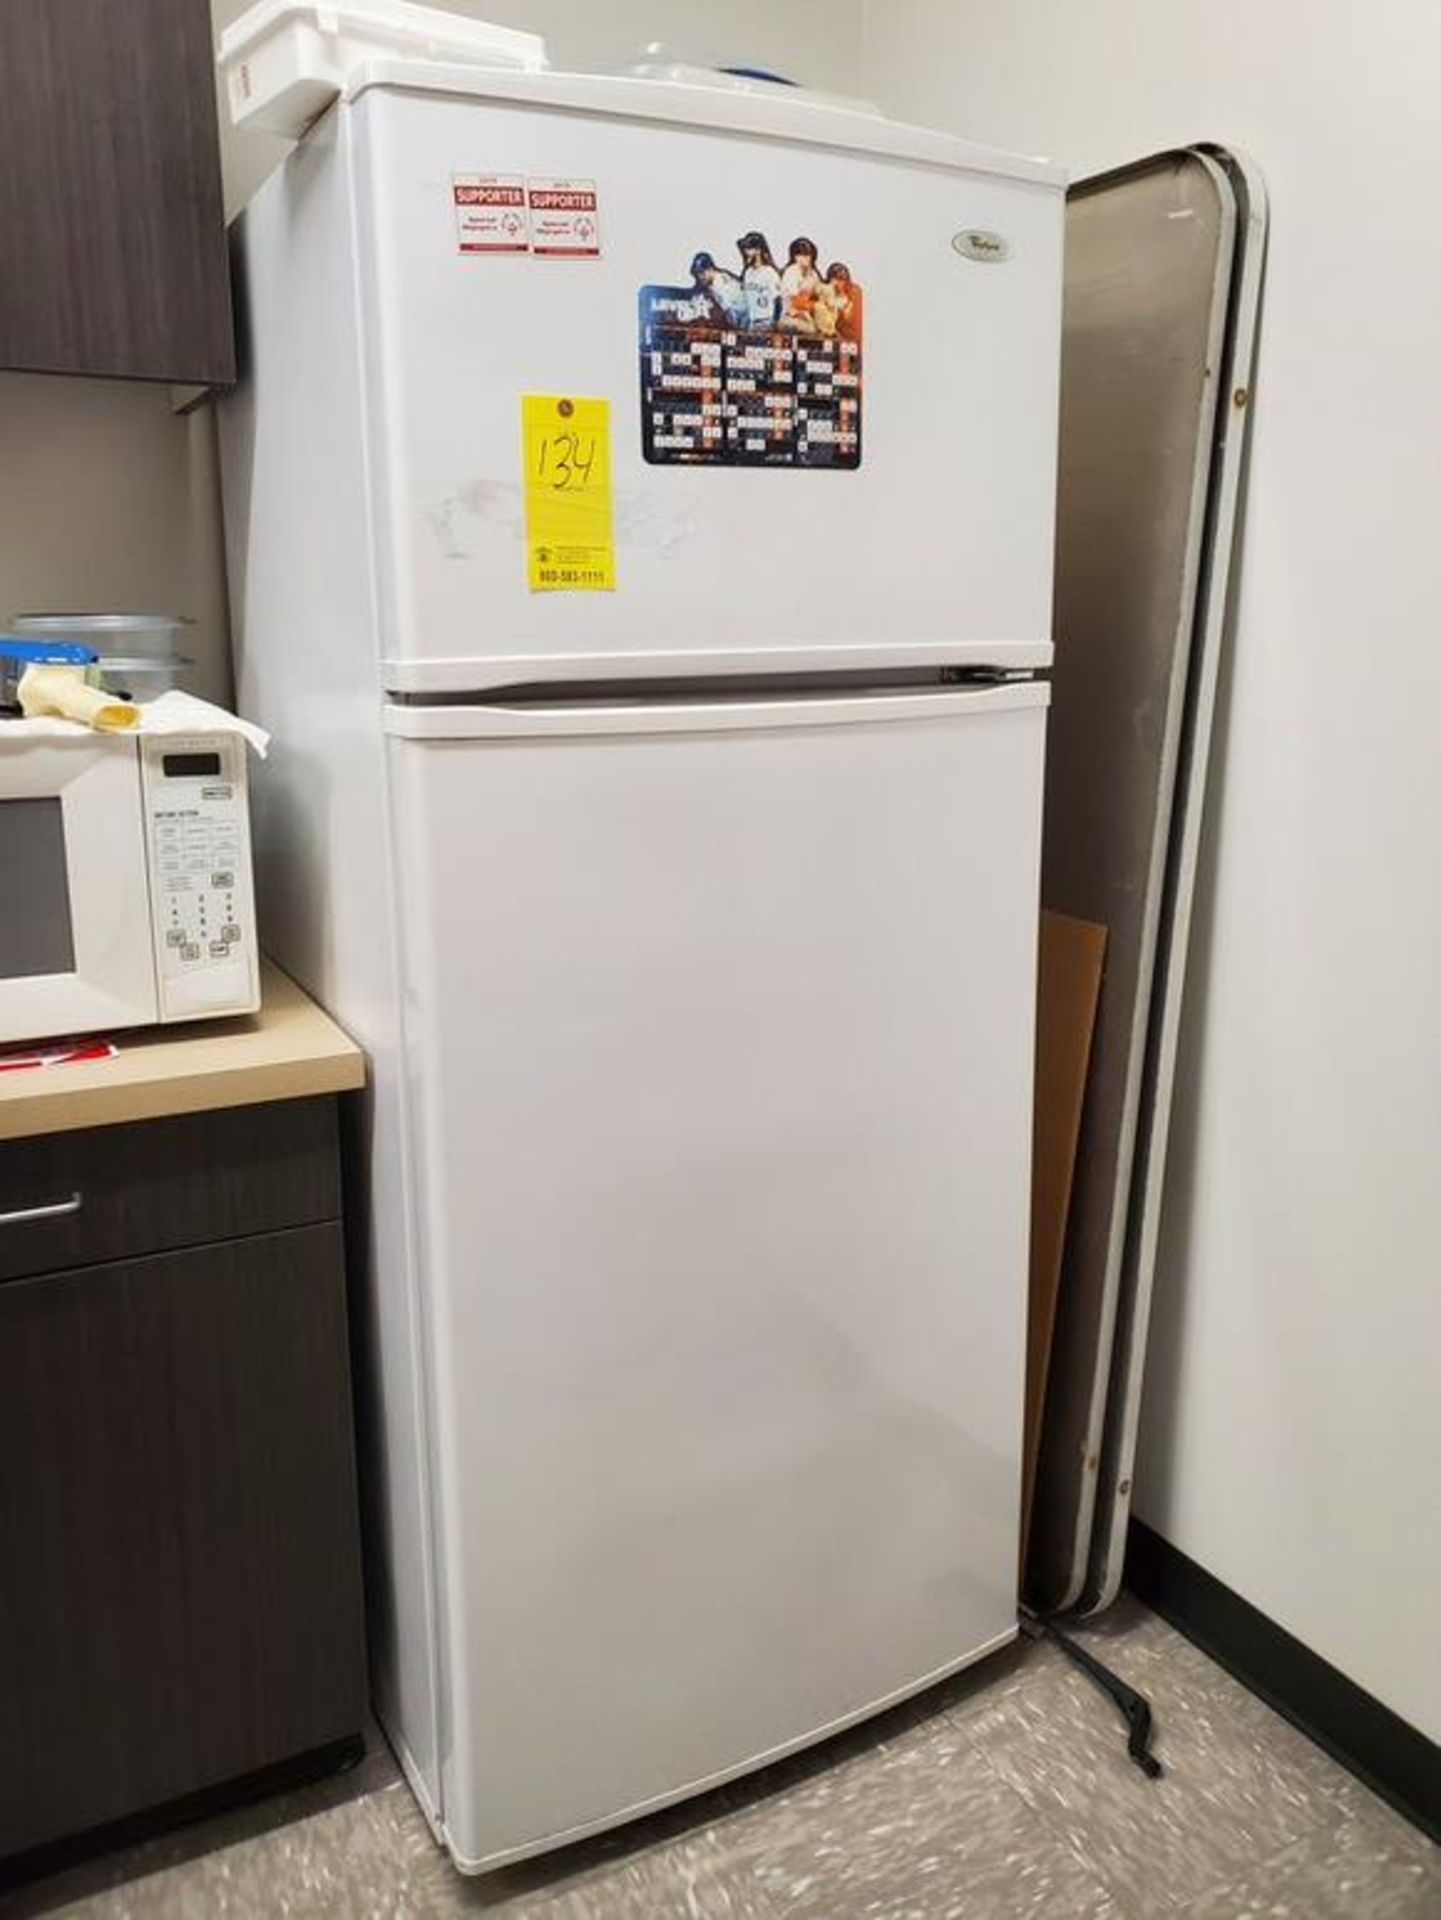 Break Room Contents To Include But Not Limited To: (1) GE Fridge; (1) Whirlpool Fridge; (1) 6- - Image 2 of 10